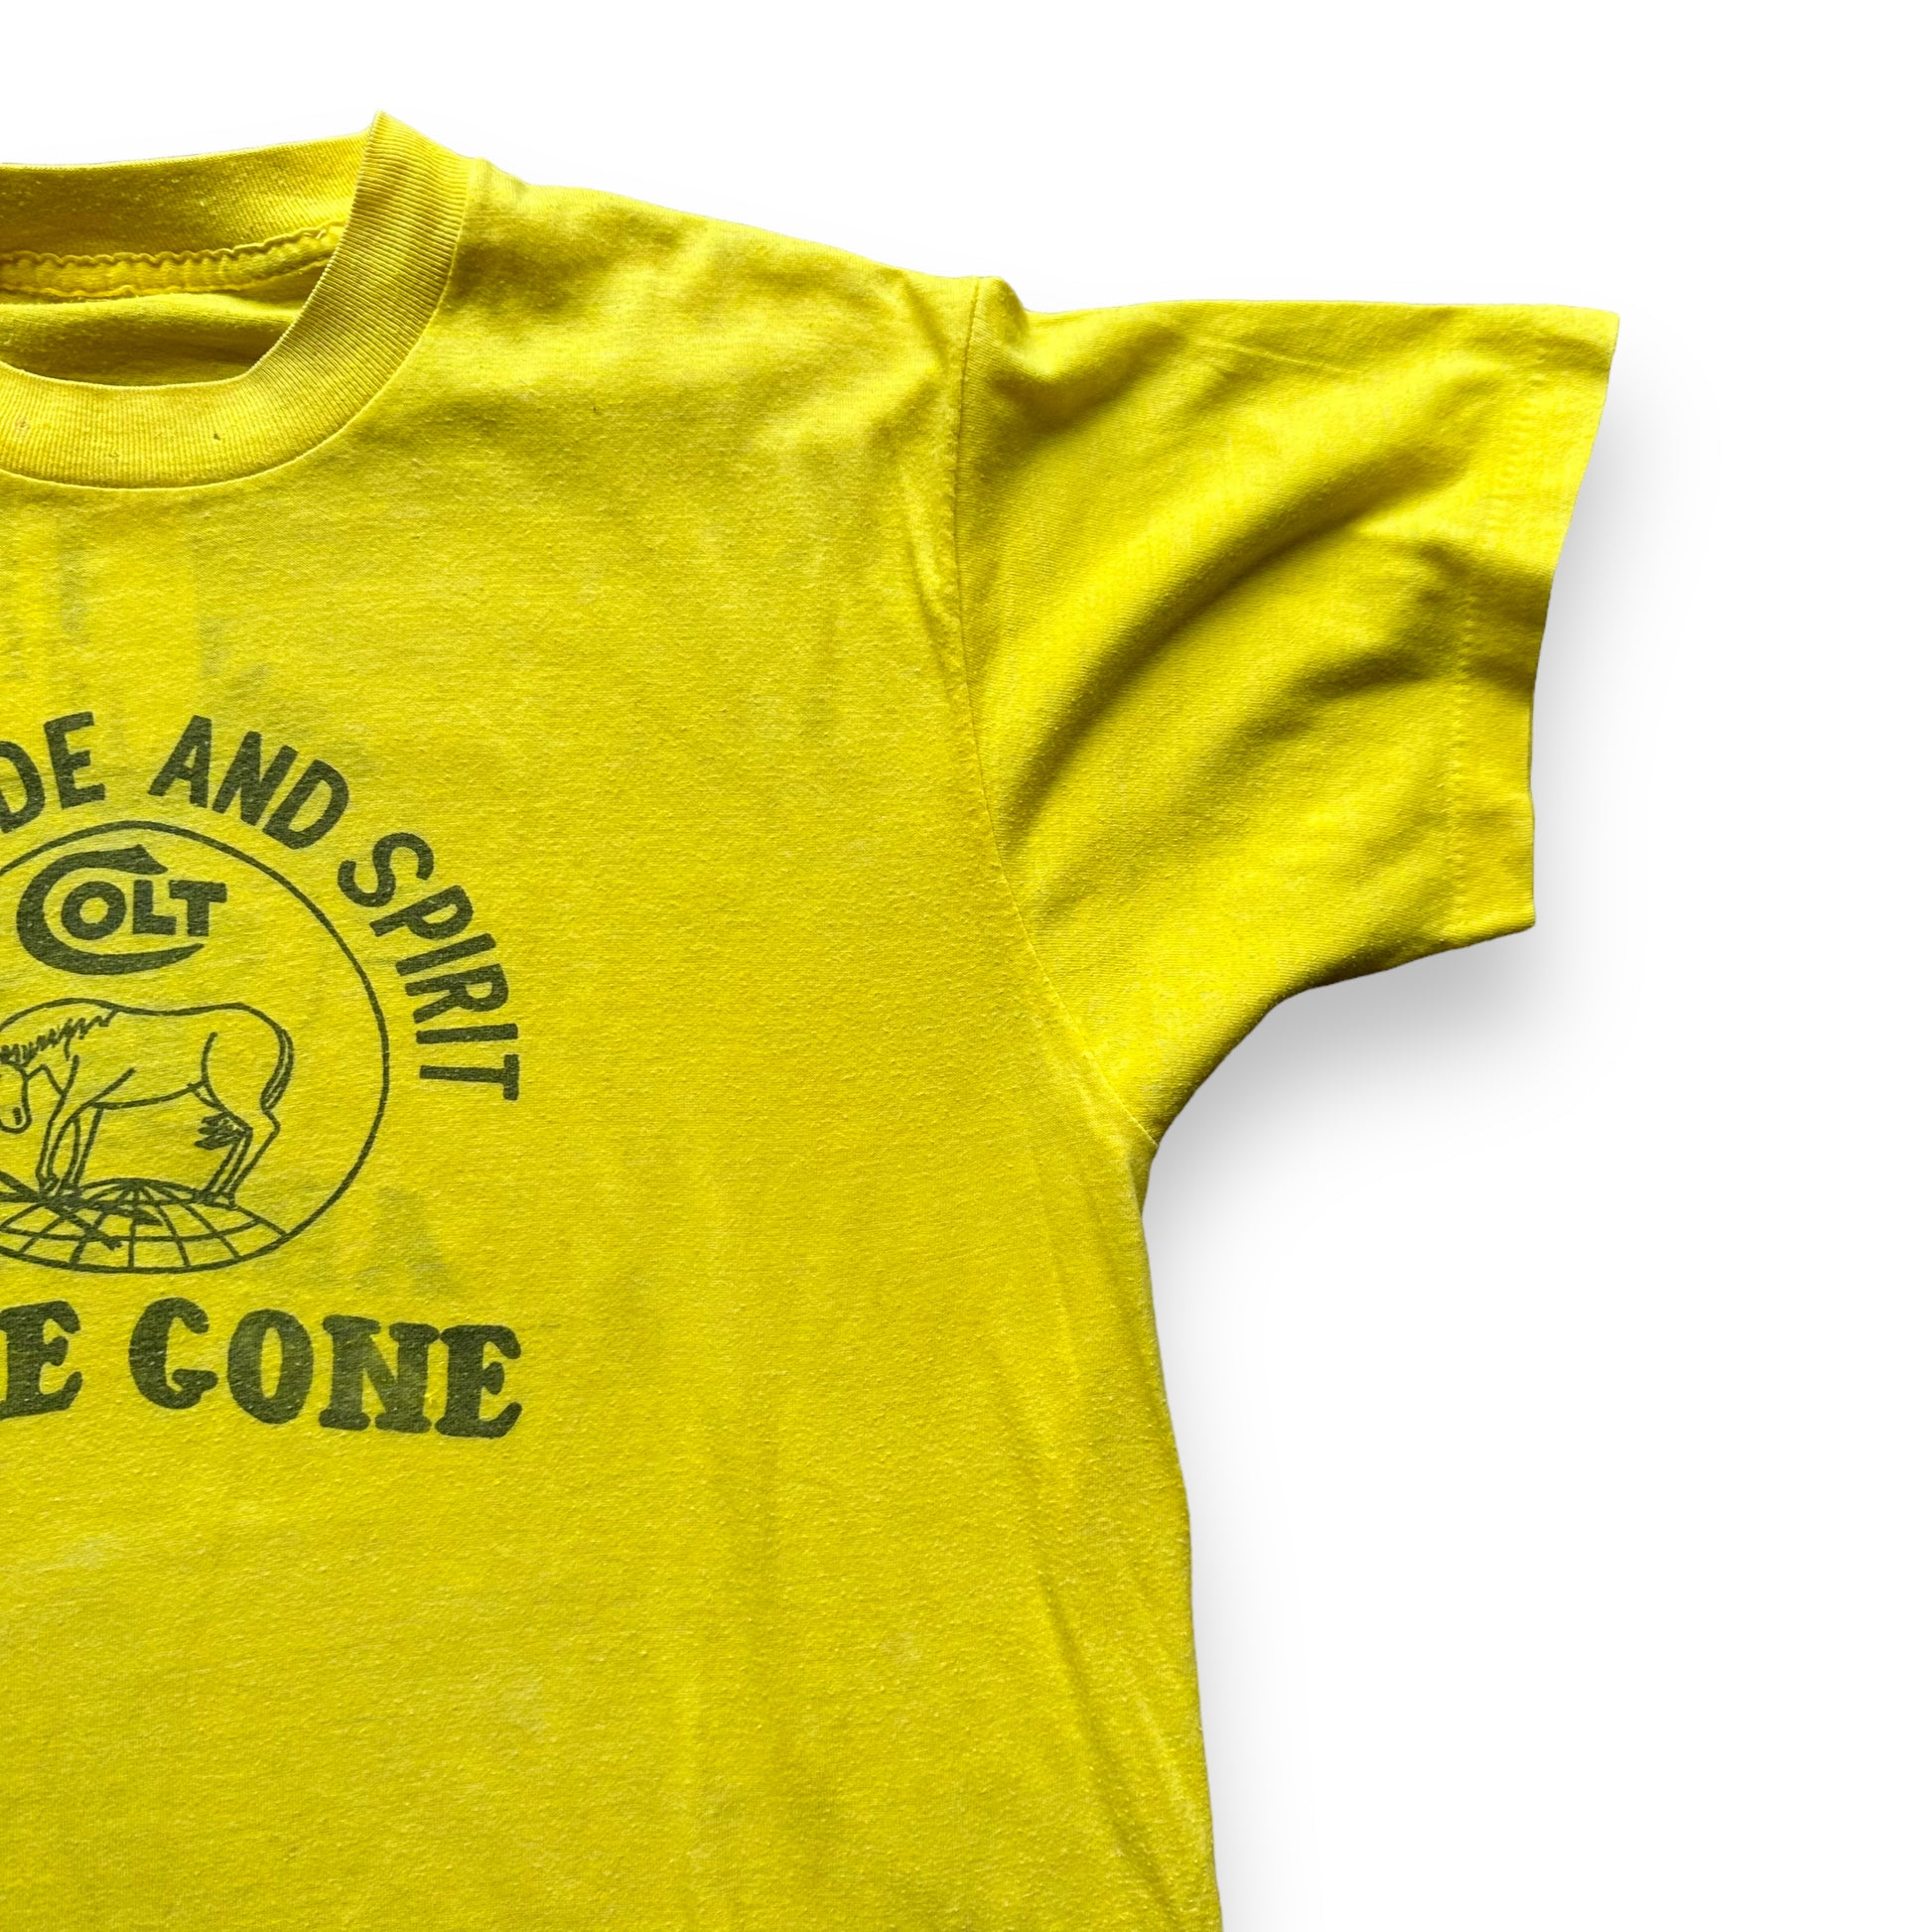 Front Left Sleeve View of Vintage Colt "The Pride and Spirit Are Gone" Tee SZ L | Vintage T-Shirts Seattle | Barn Owl Vintage Tees Seattle